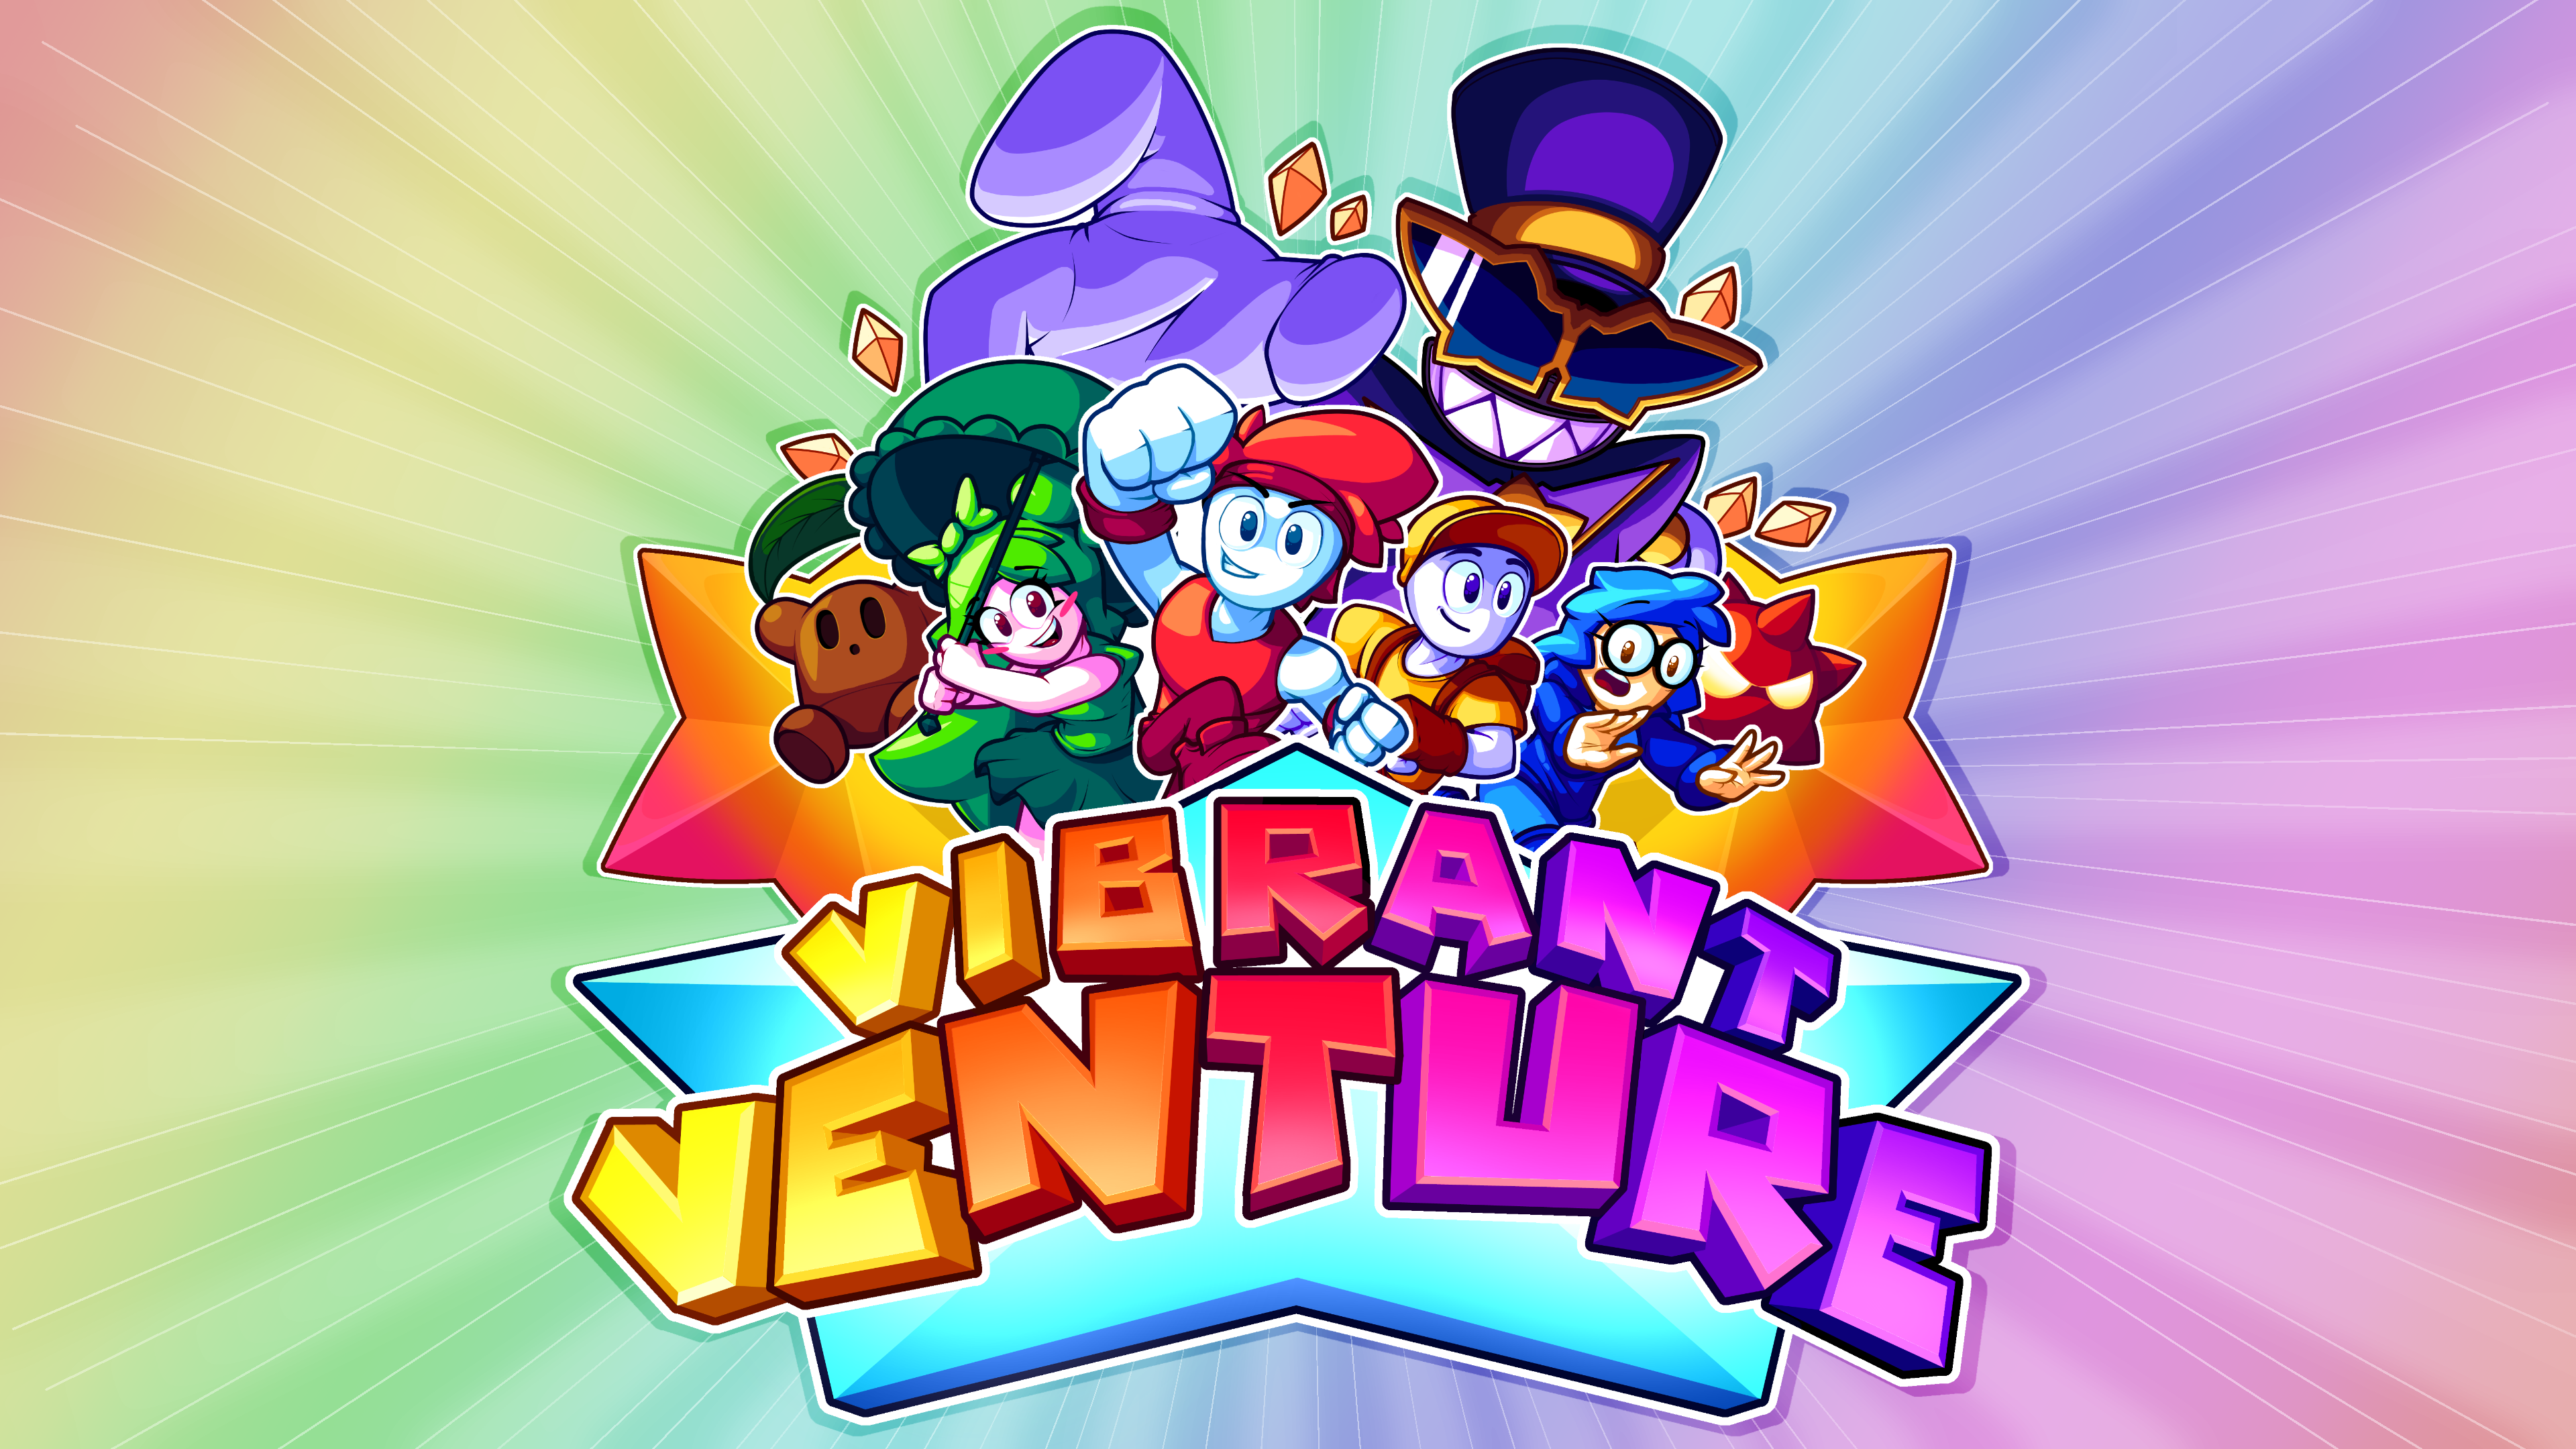 Vibrant Venture By Semag Games - download roblox completo